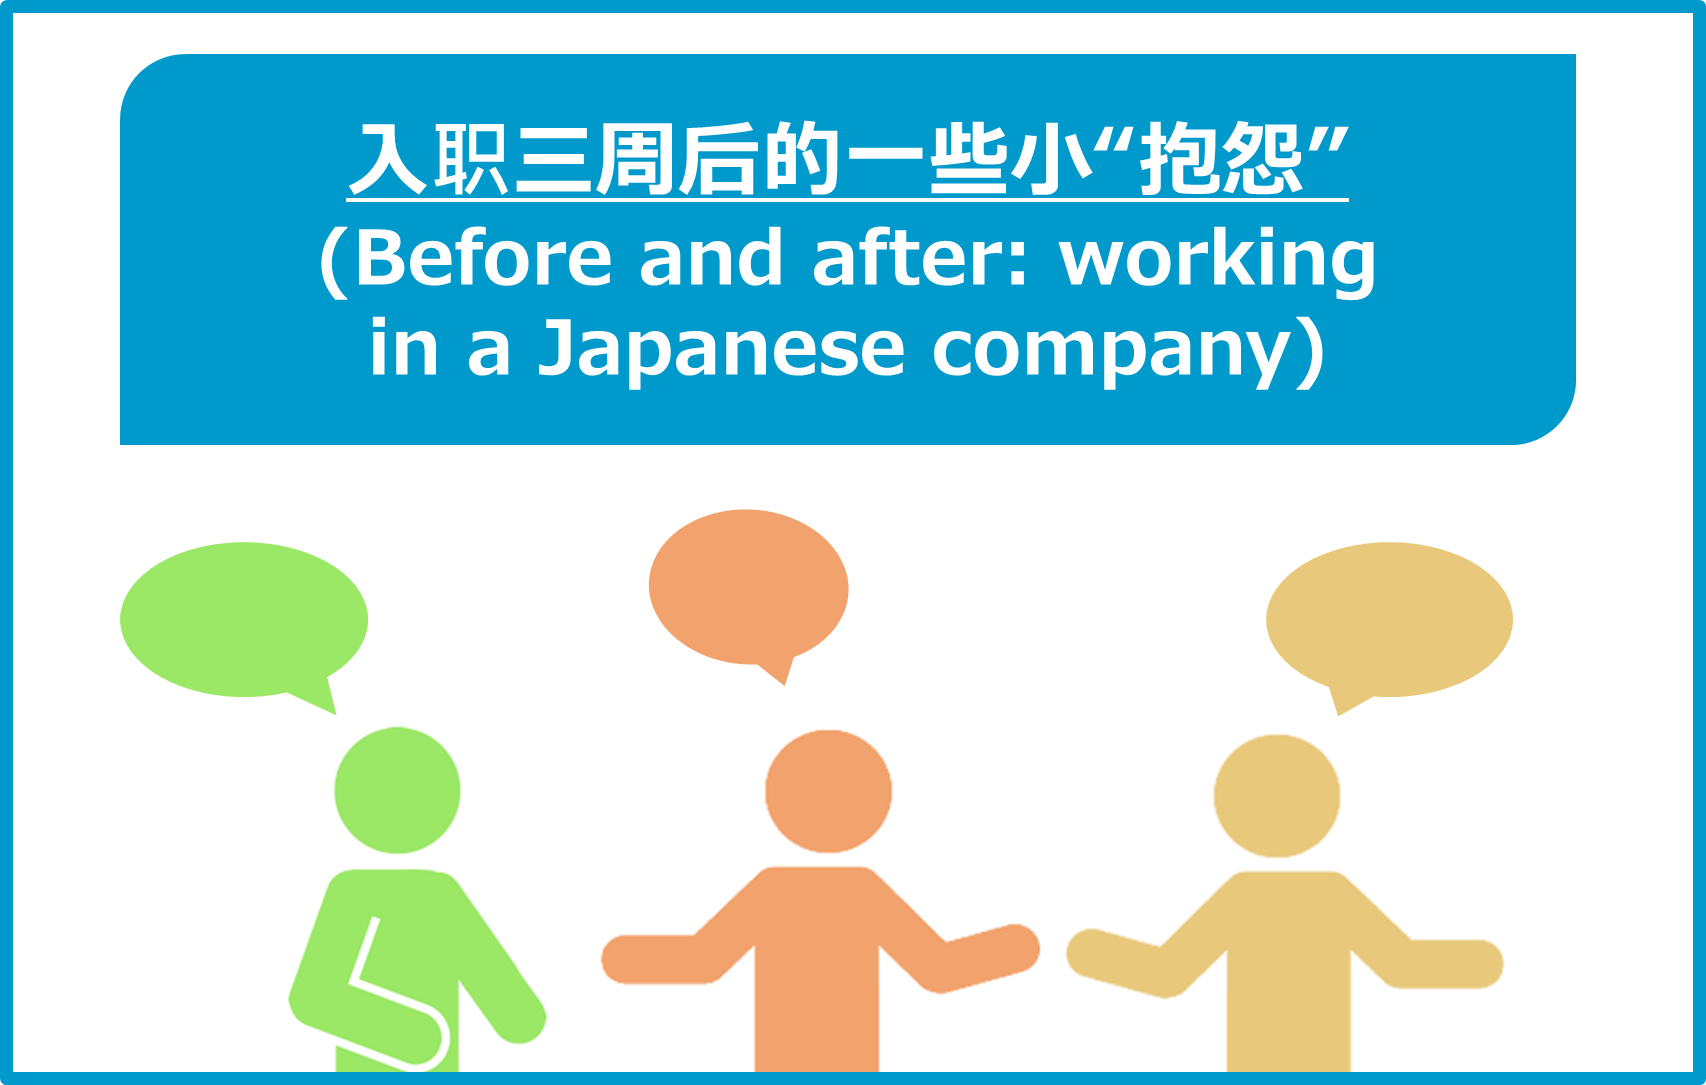 Before and after: working at a Japanese company